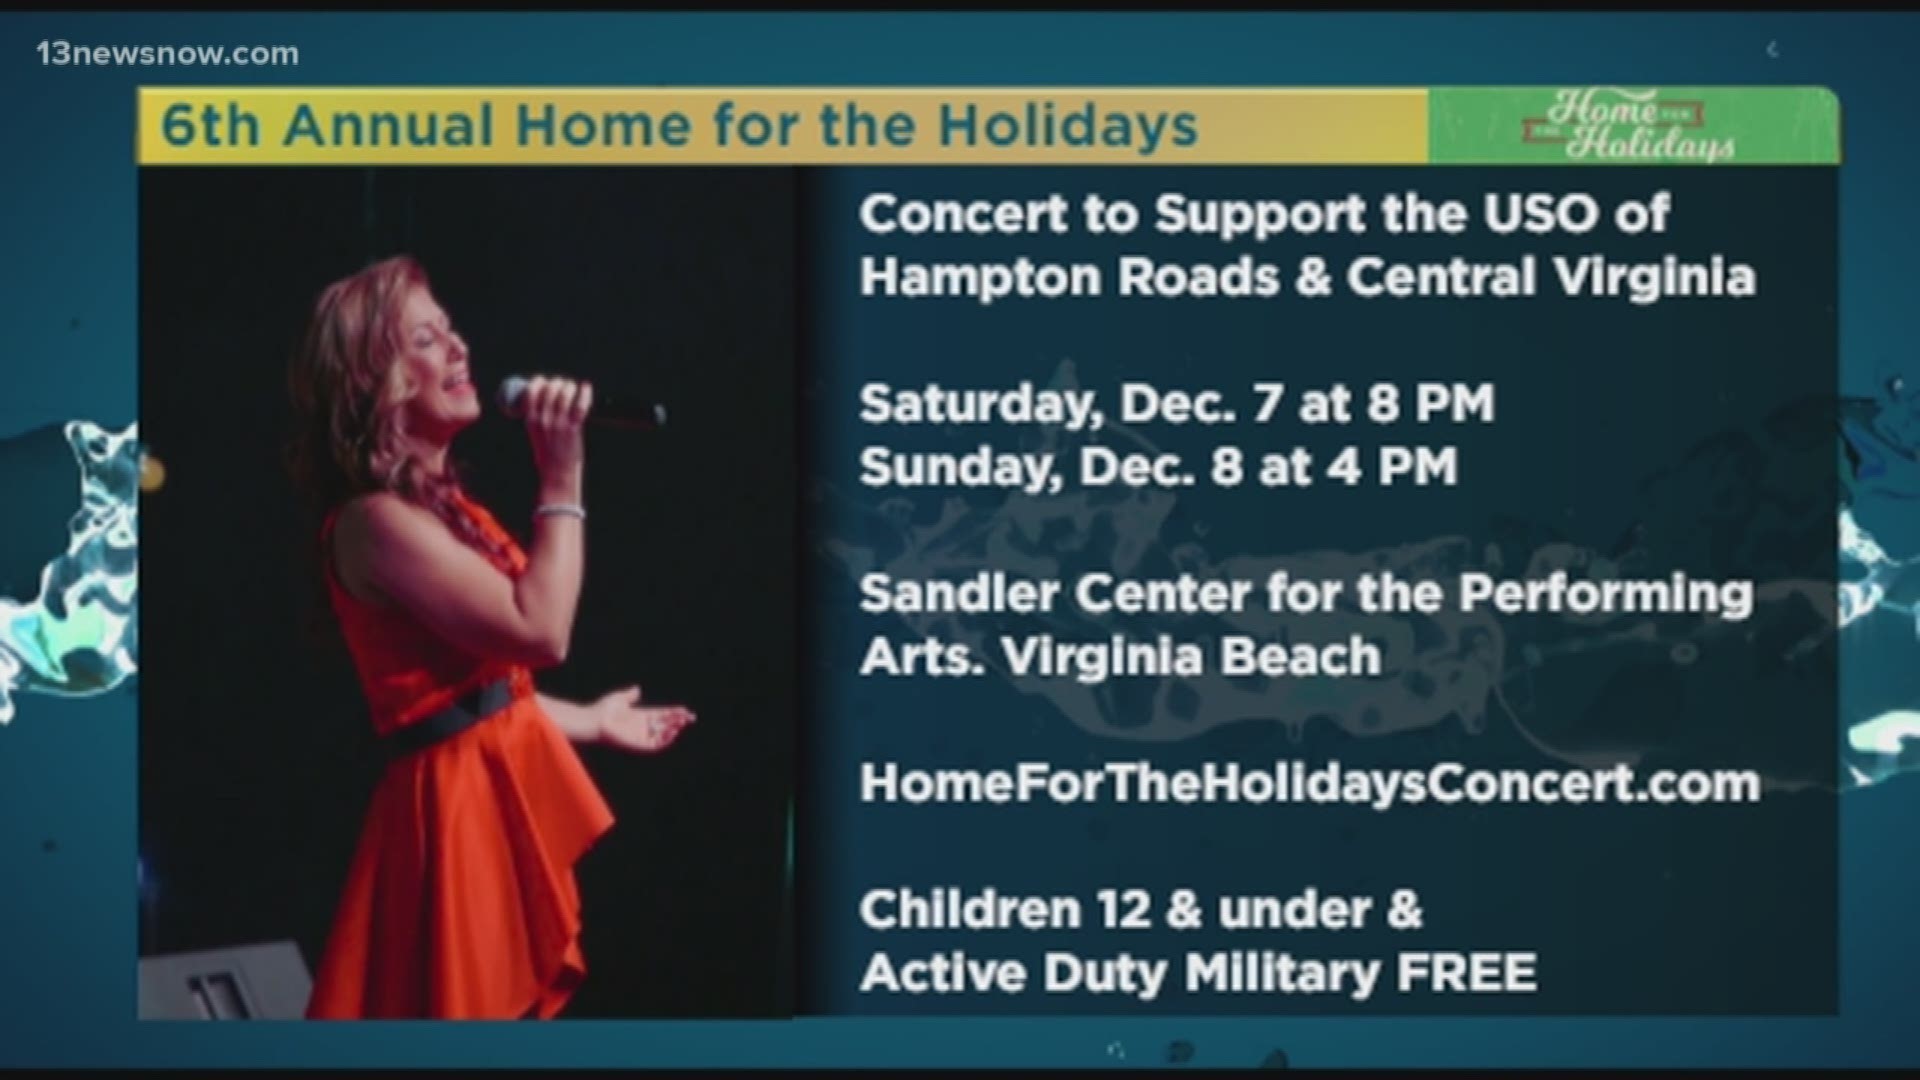 The 6th Annual Home for the Holiday concerts are this weekend.